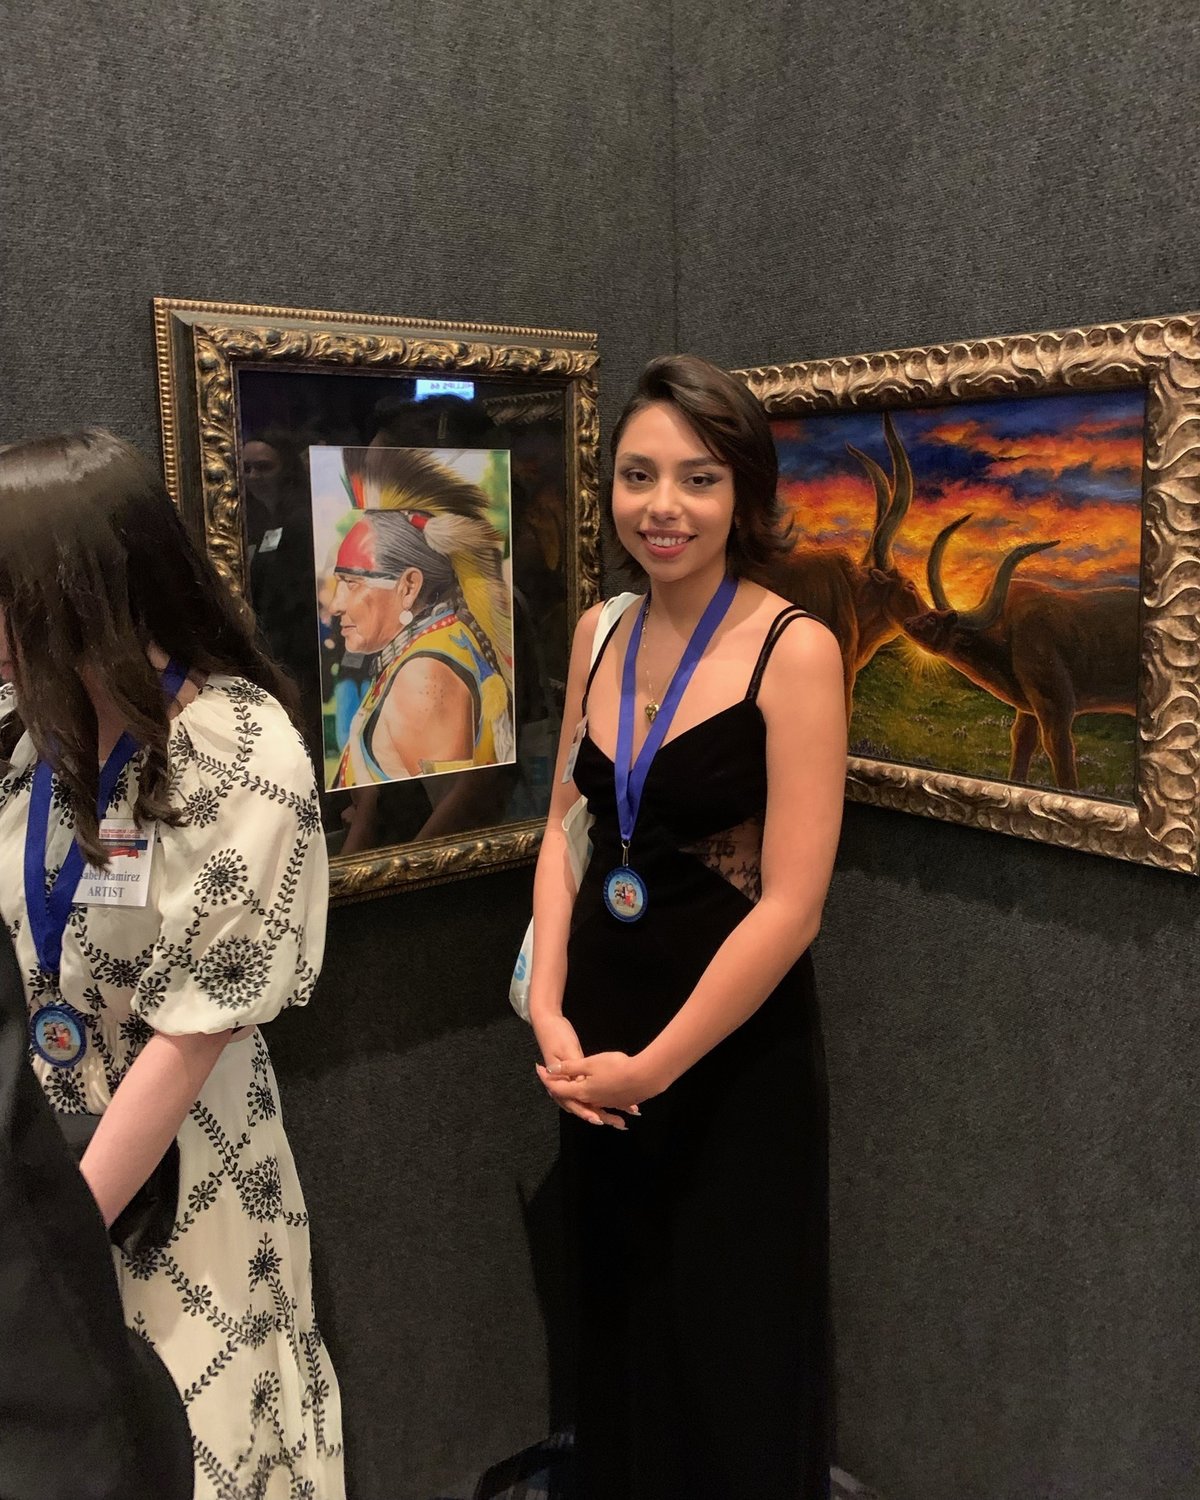 Tompkins High School alumna Sofia Regalado is the Featured Artist Winner in the “I Am Texas” book and exhibition from iWRITE and the Bryan Museum. “I Am Texas” combines both nonprofits’ missions, to build student confidence through art and writing about their Texas stories.